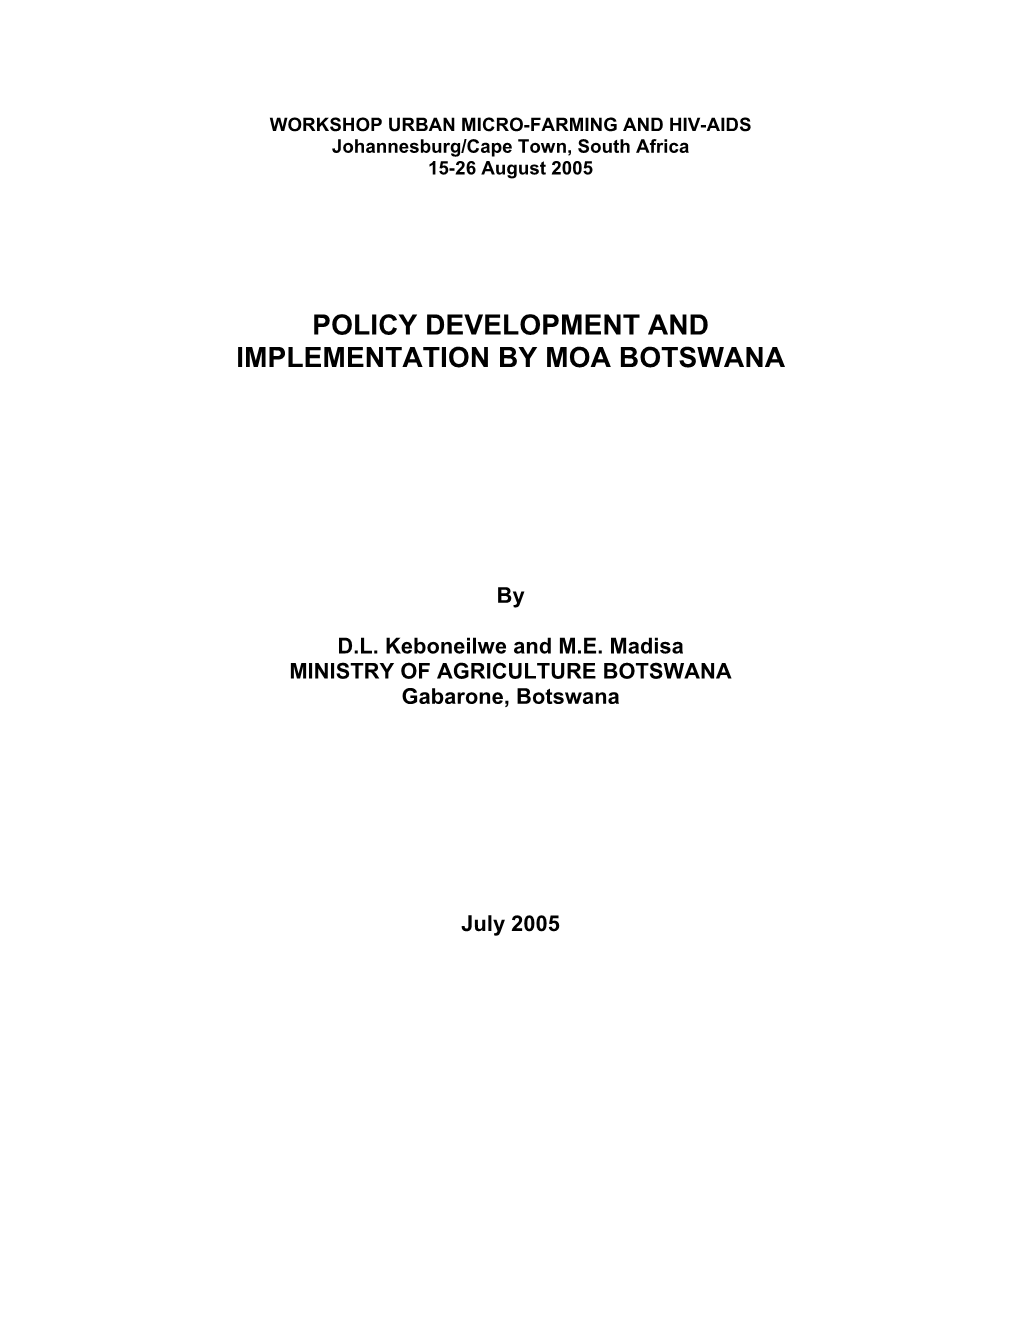 Policy Development and Implementation by Moa Botswana